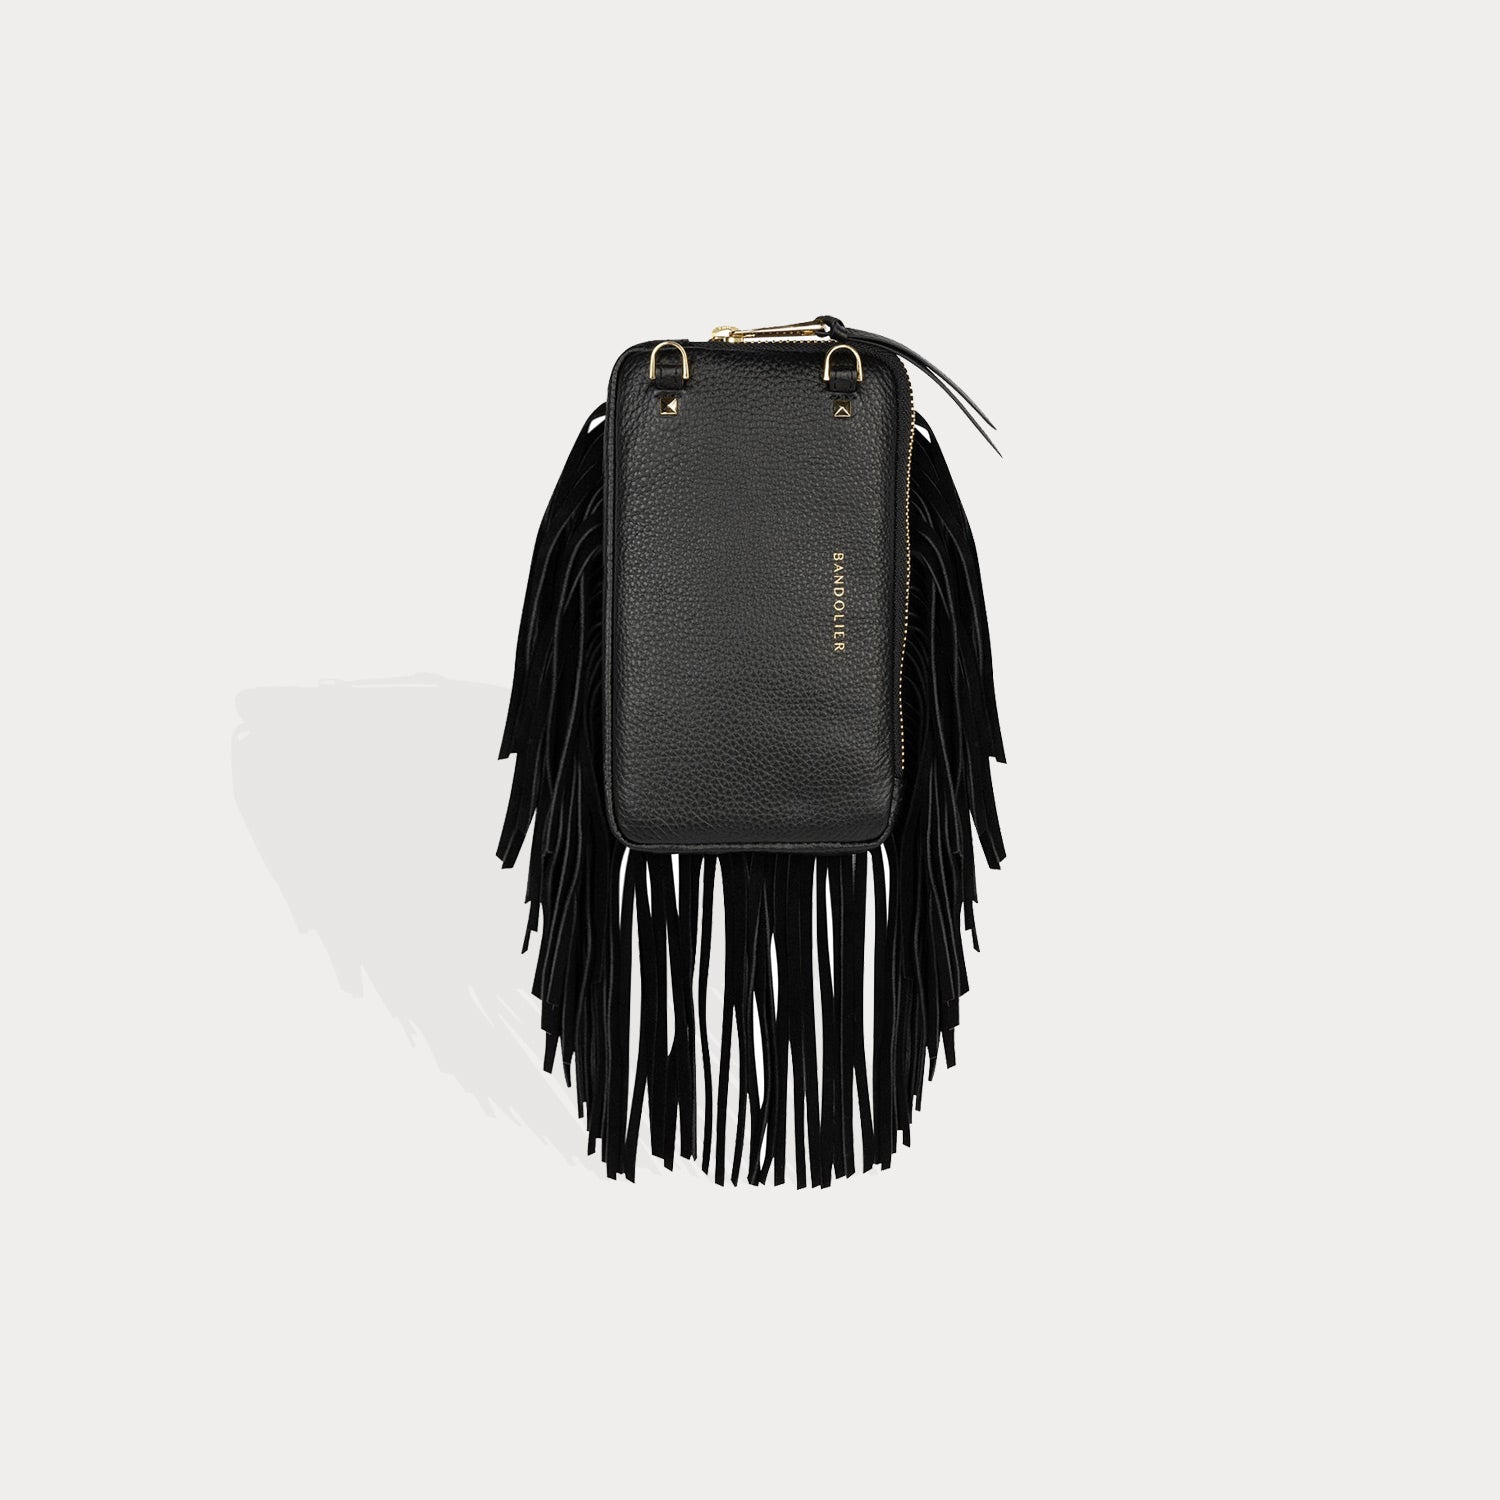 Victoria Beckham's Tassel Clutch Looked Like a Well-Groomed Maltese